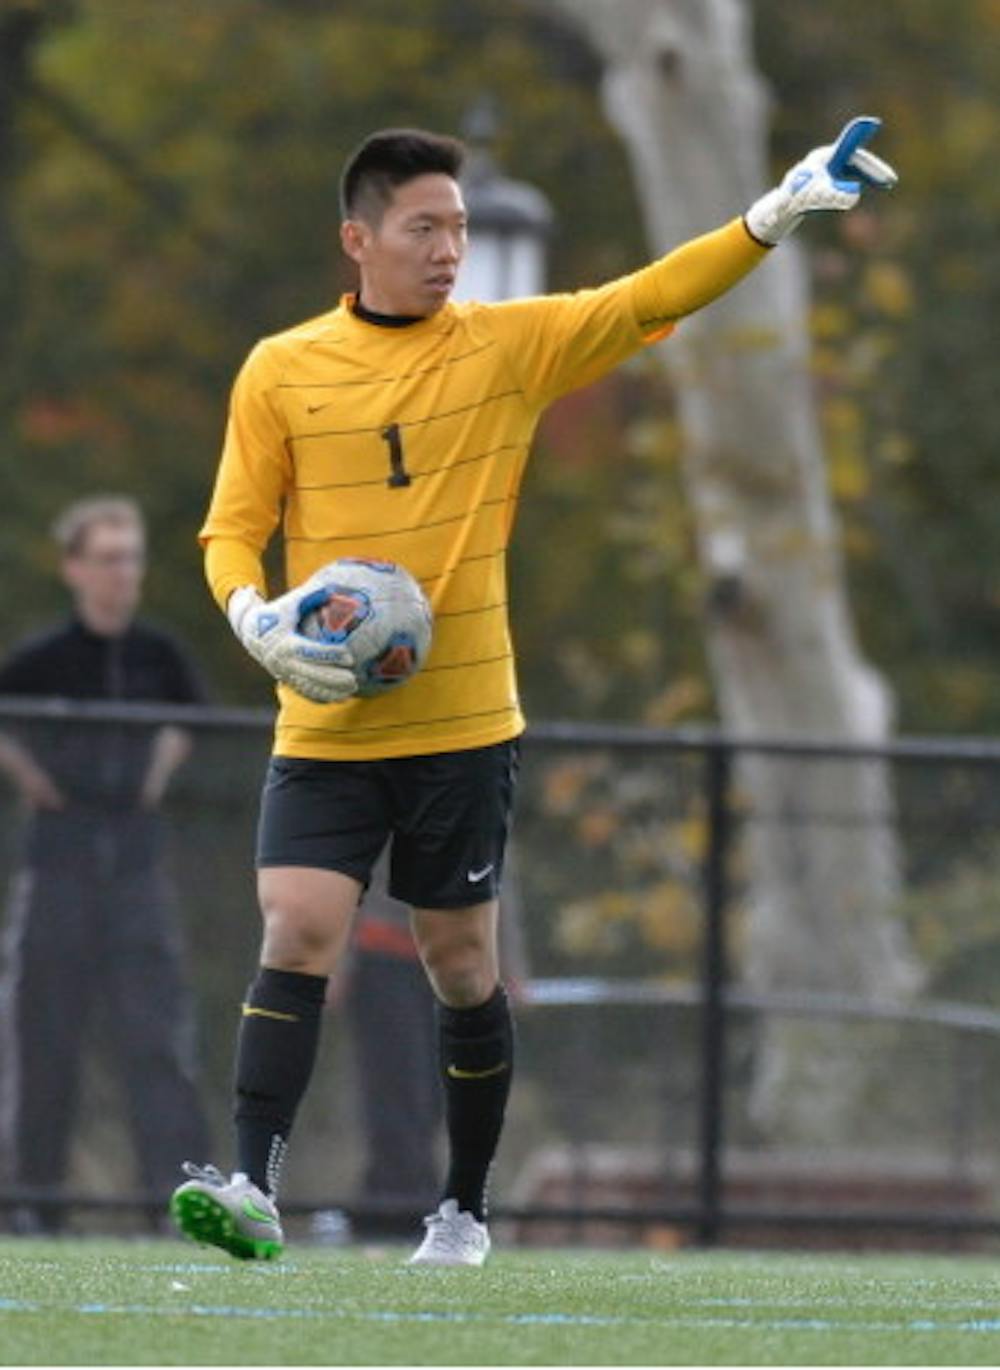 HOPKINSSPORTS.COM
Senior GK Bryan See helped backstop Hopkins to two conference wins.